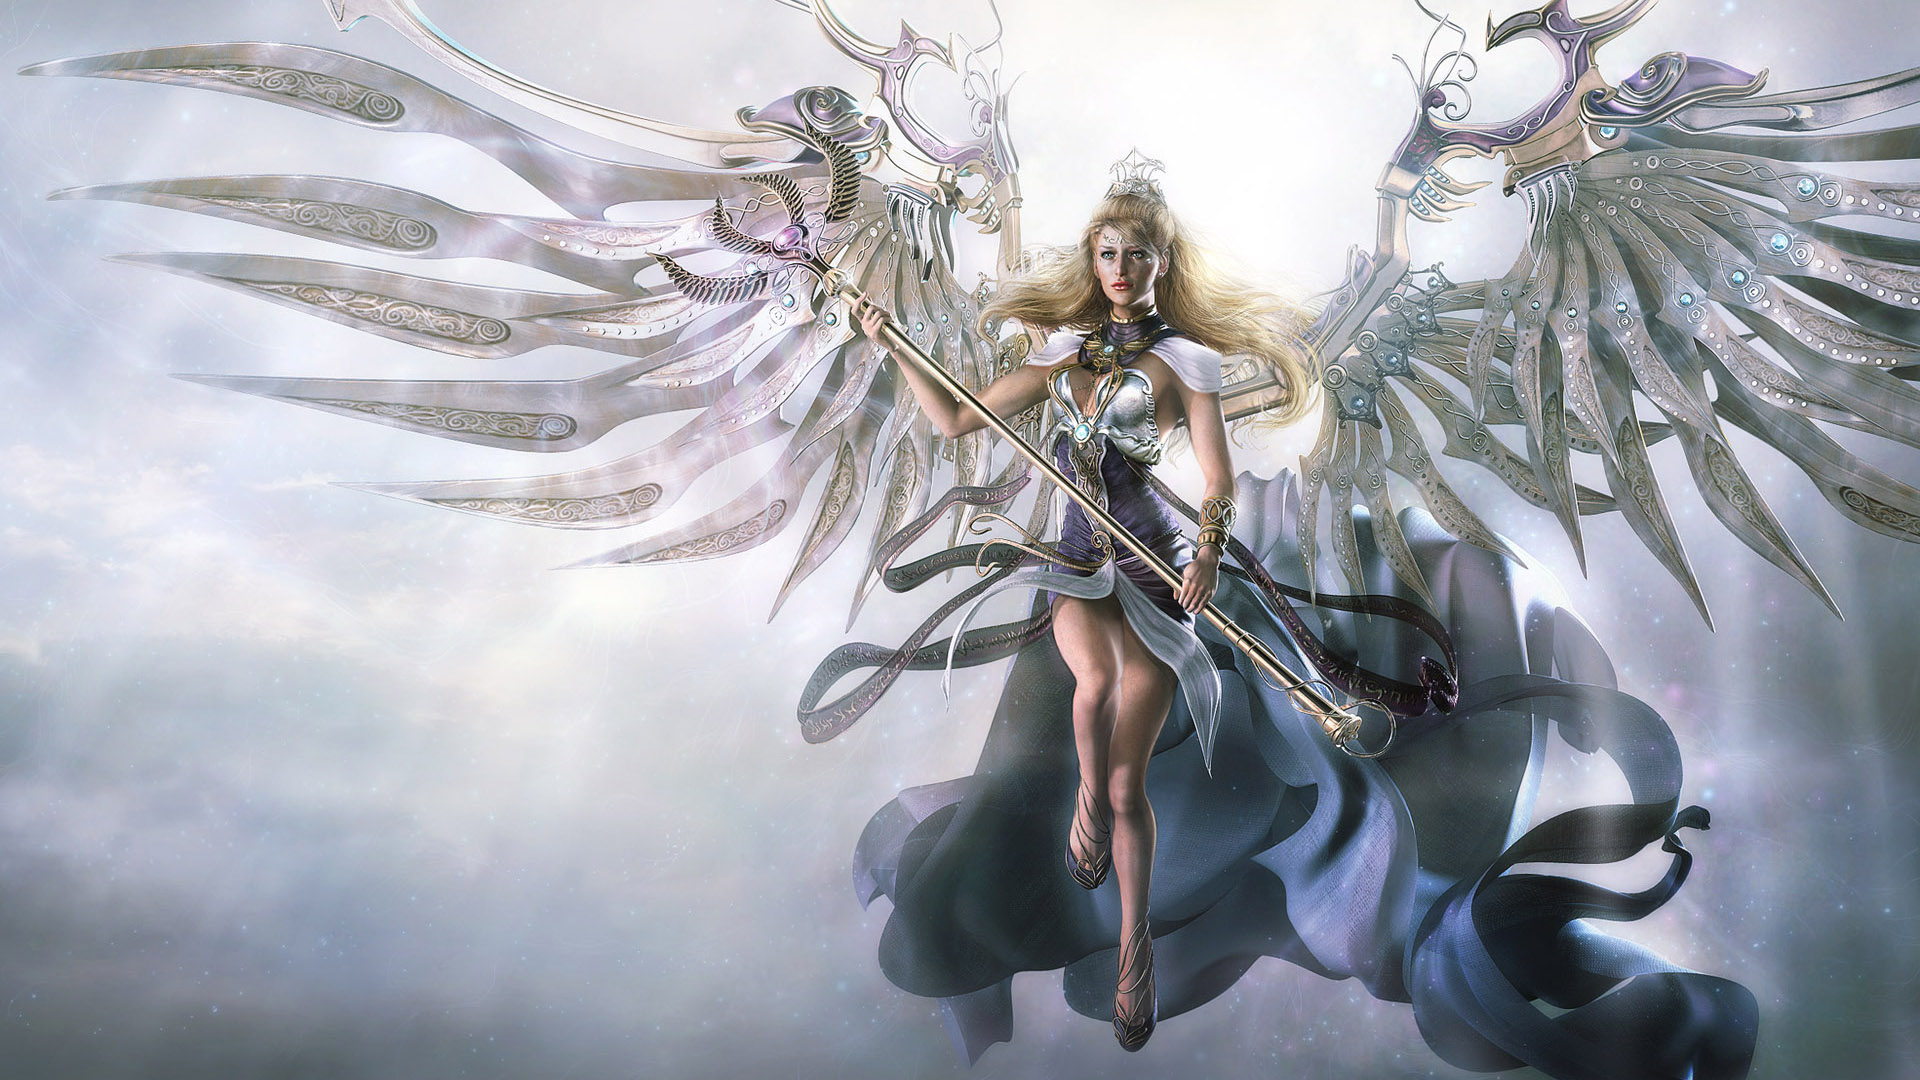 Awesome Angel 3D Fantasy Wallpaper HD Widescreen 1080p Wallpaper with 1920x1080